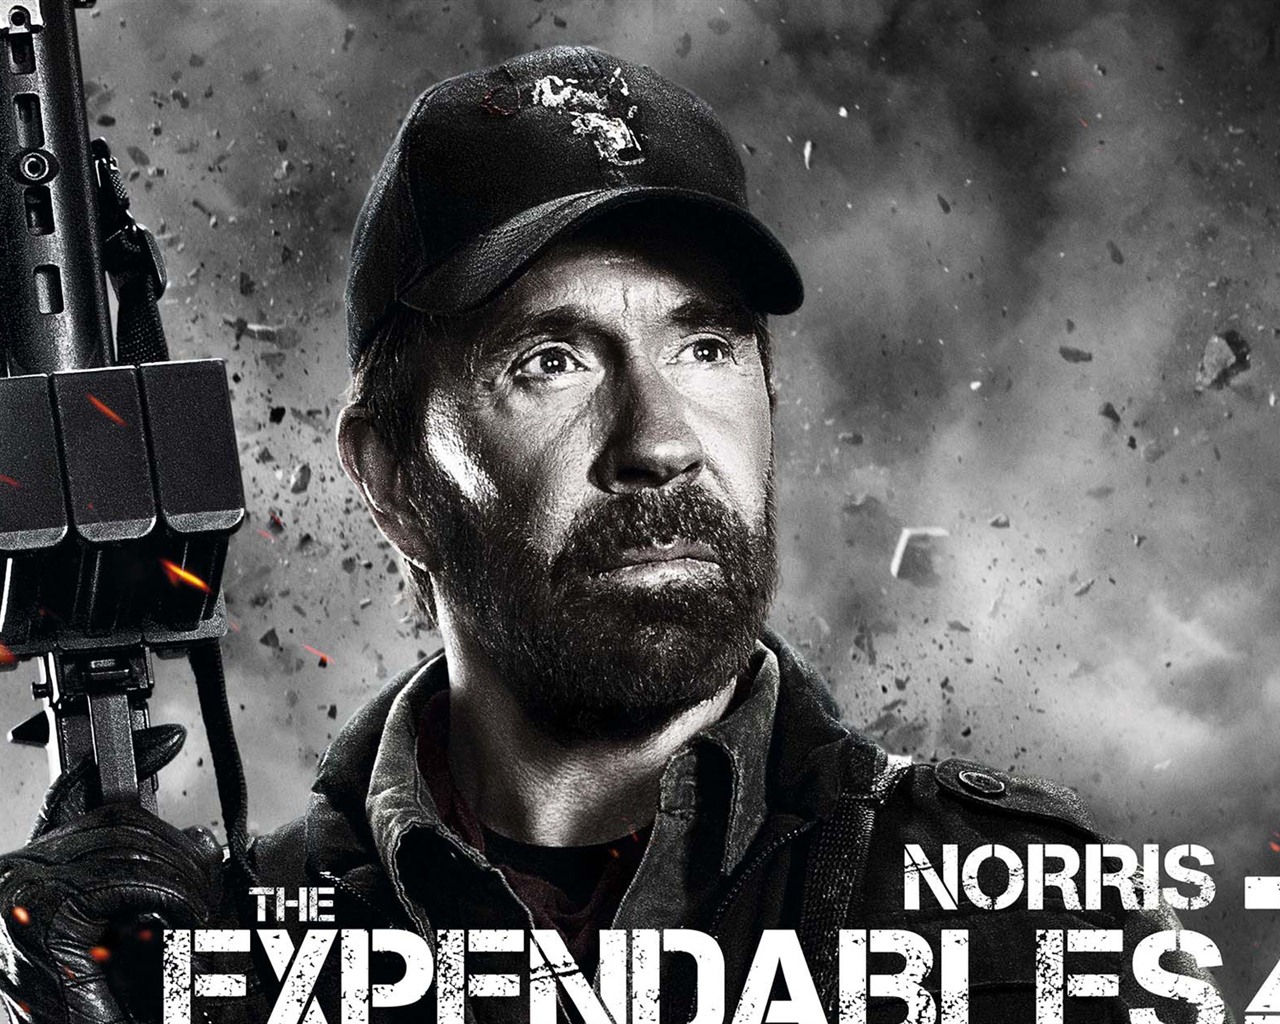 2012 The Expendables 2 敢死队2 高清壁纸13 - 1280x1024